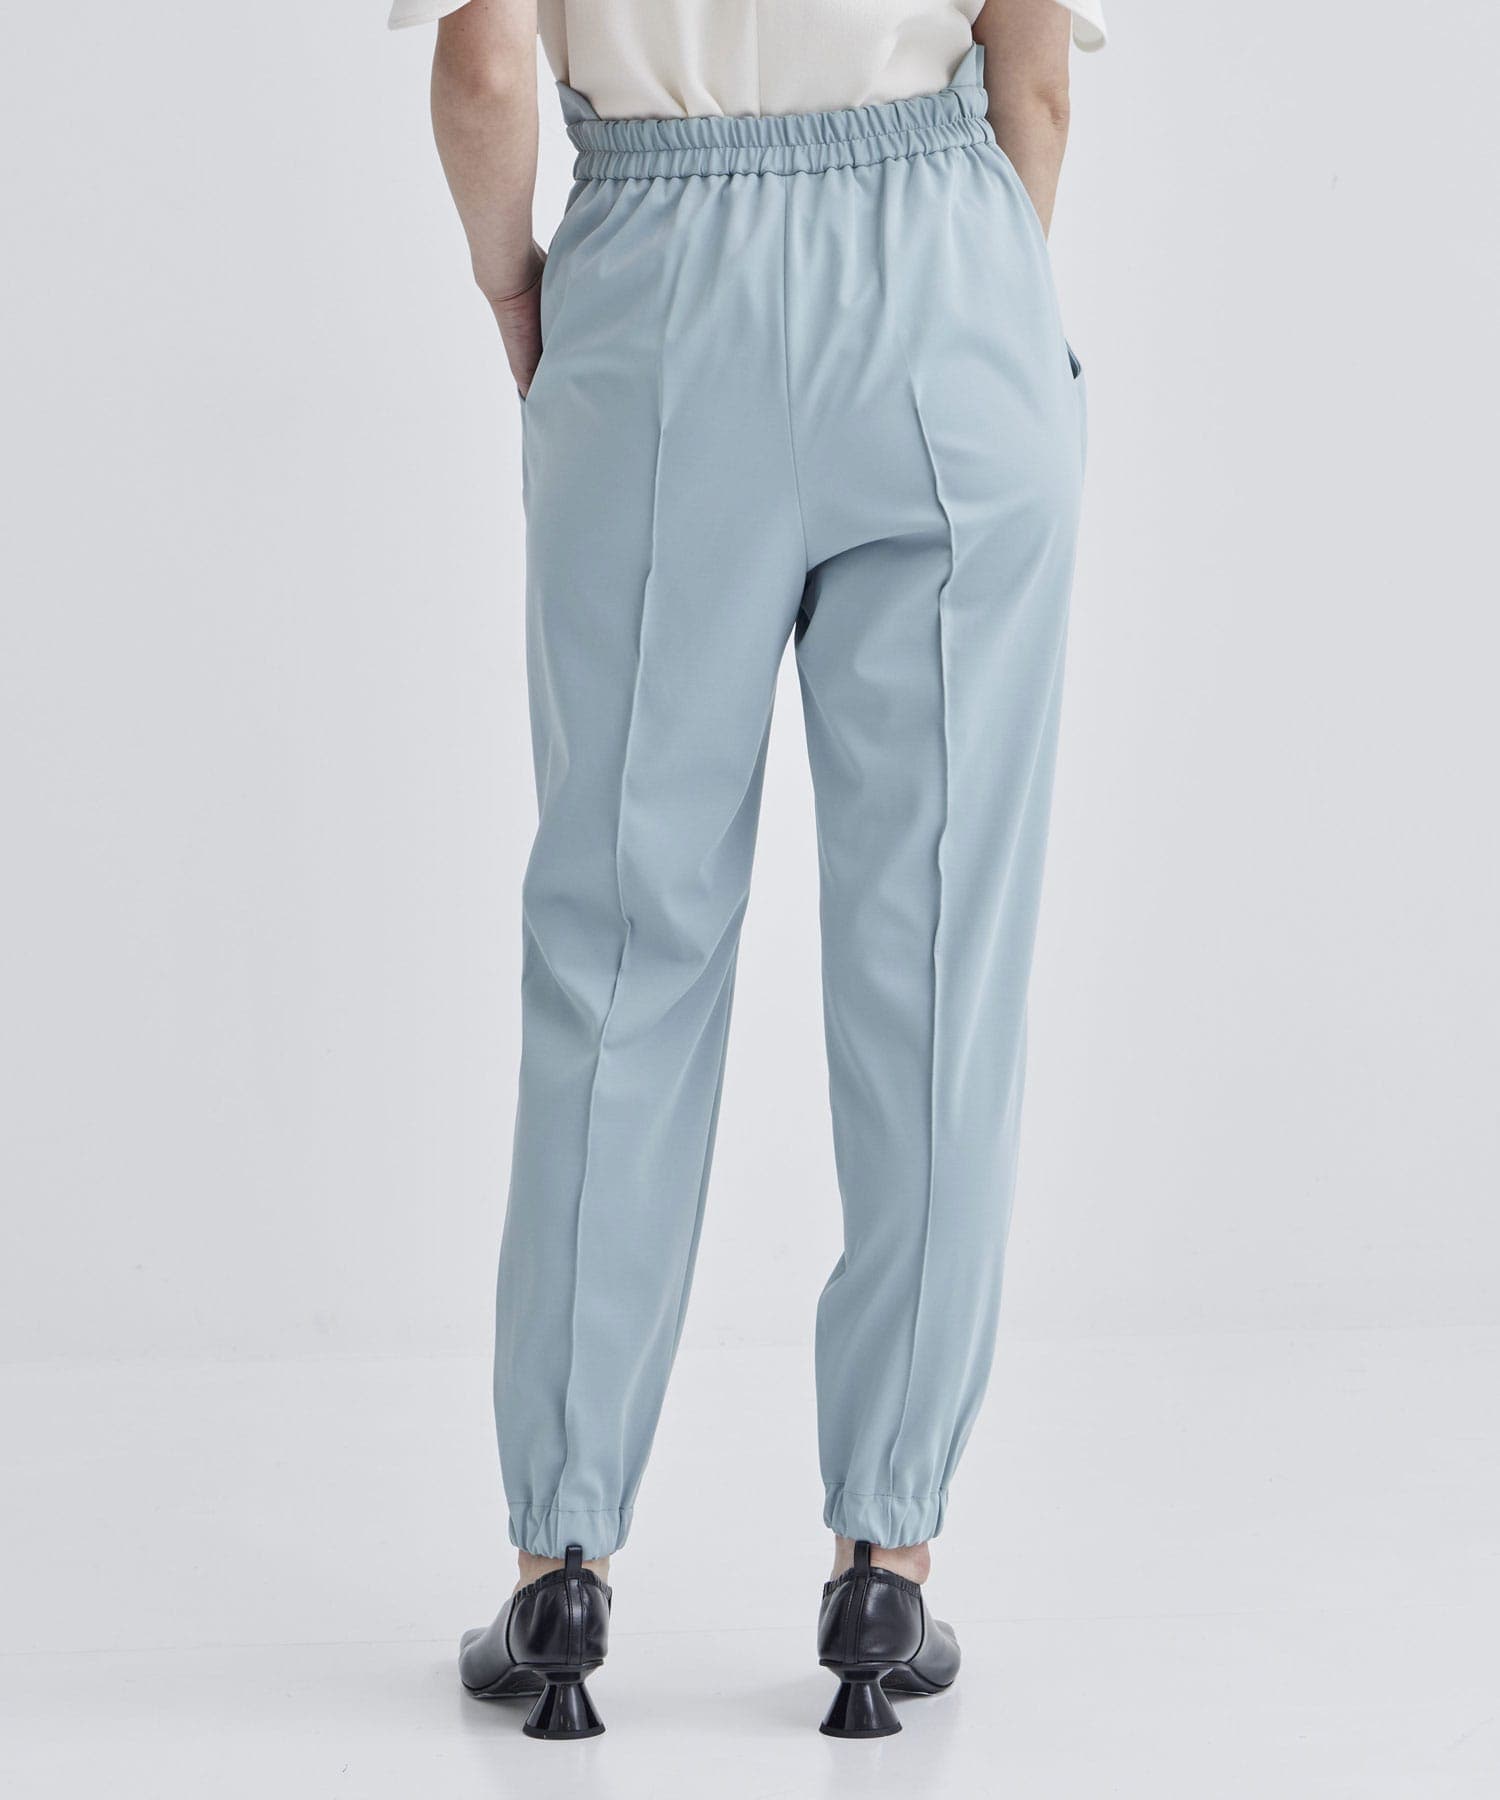 ULTRA LIGHT WASHABLE HIGH FANCTION JERSEY JOGGER PANTS THE PERMANENT EYE